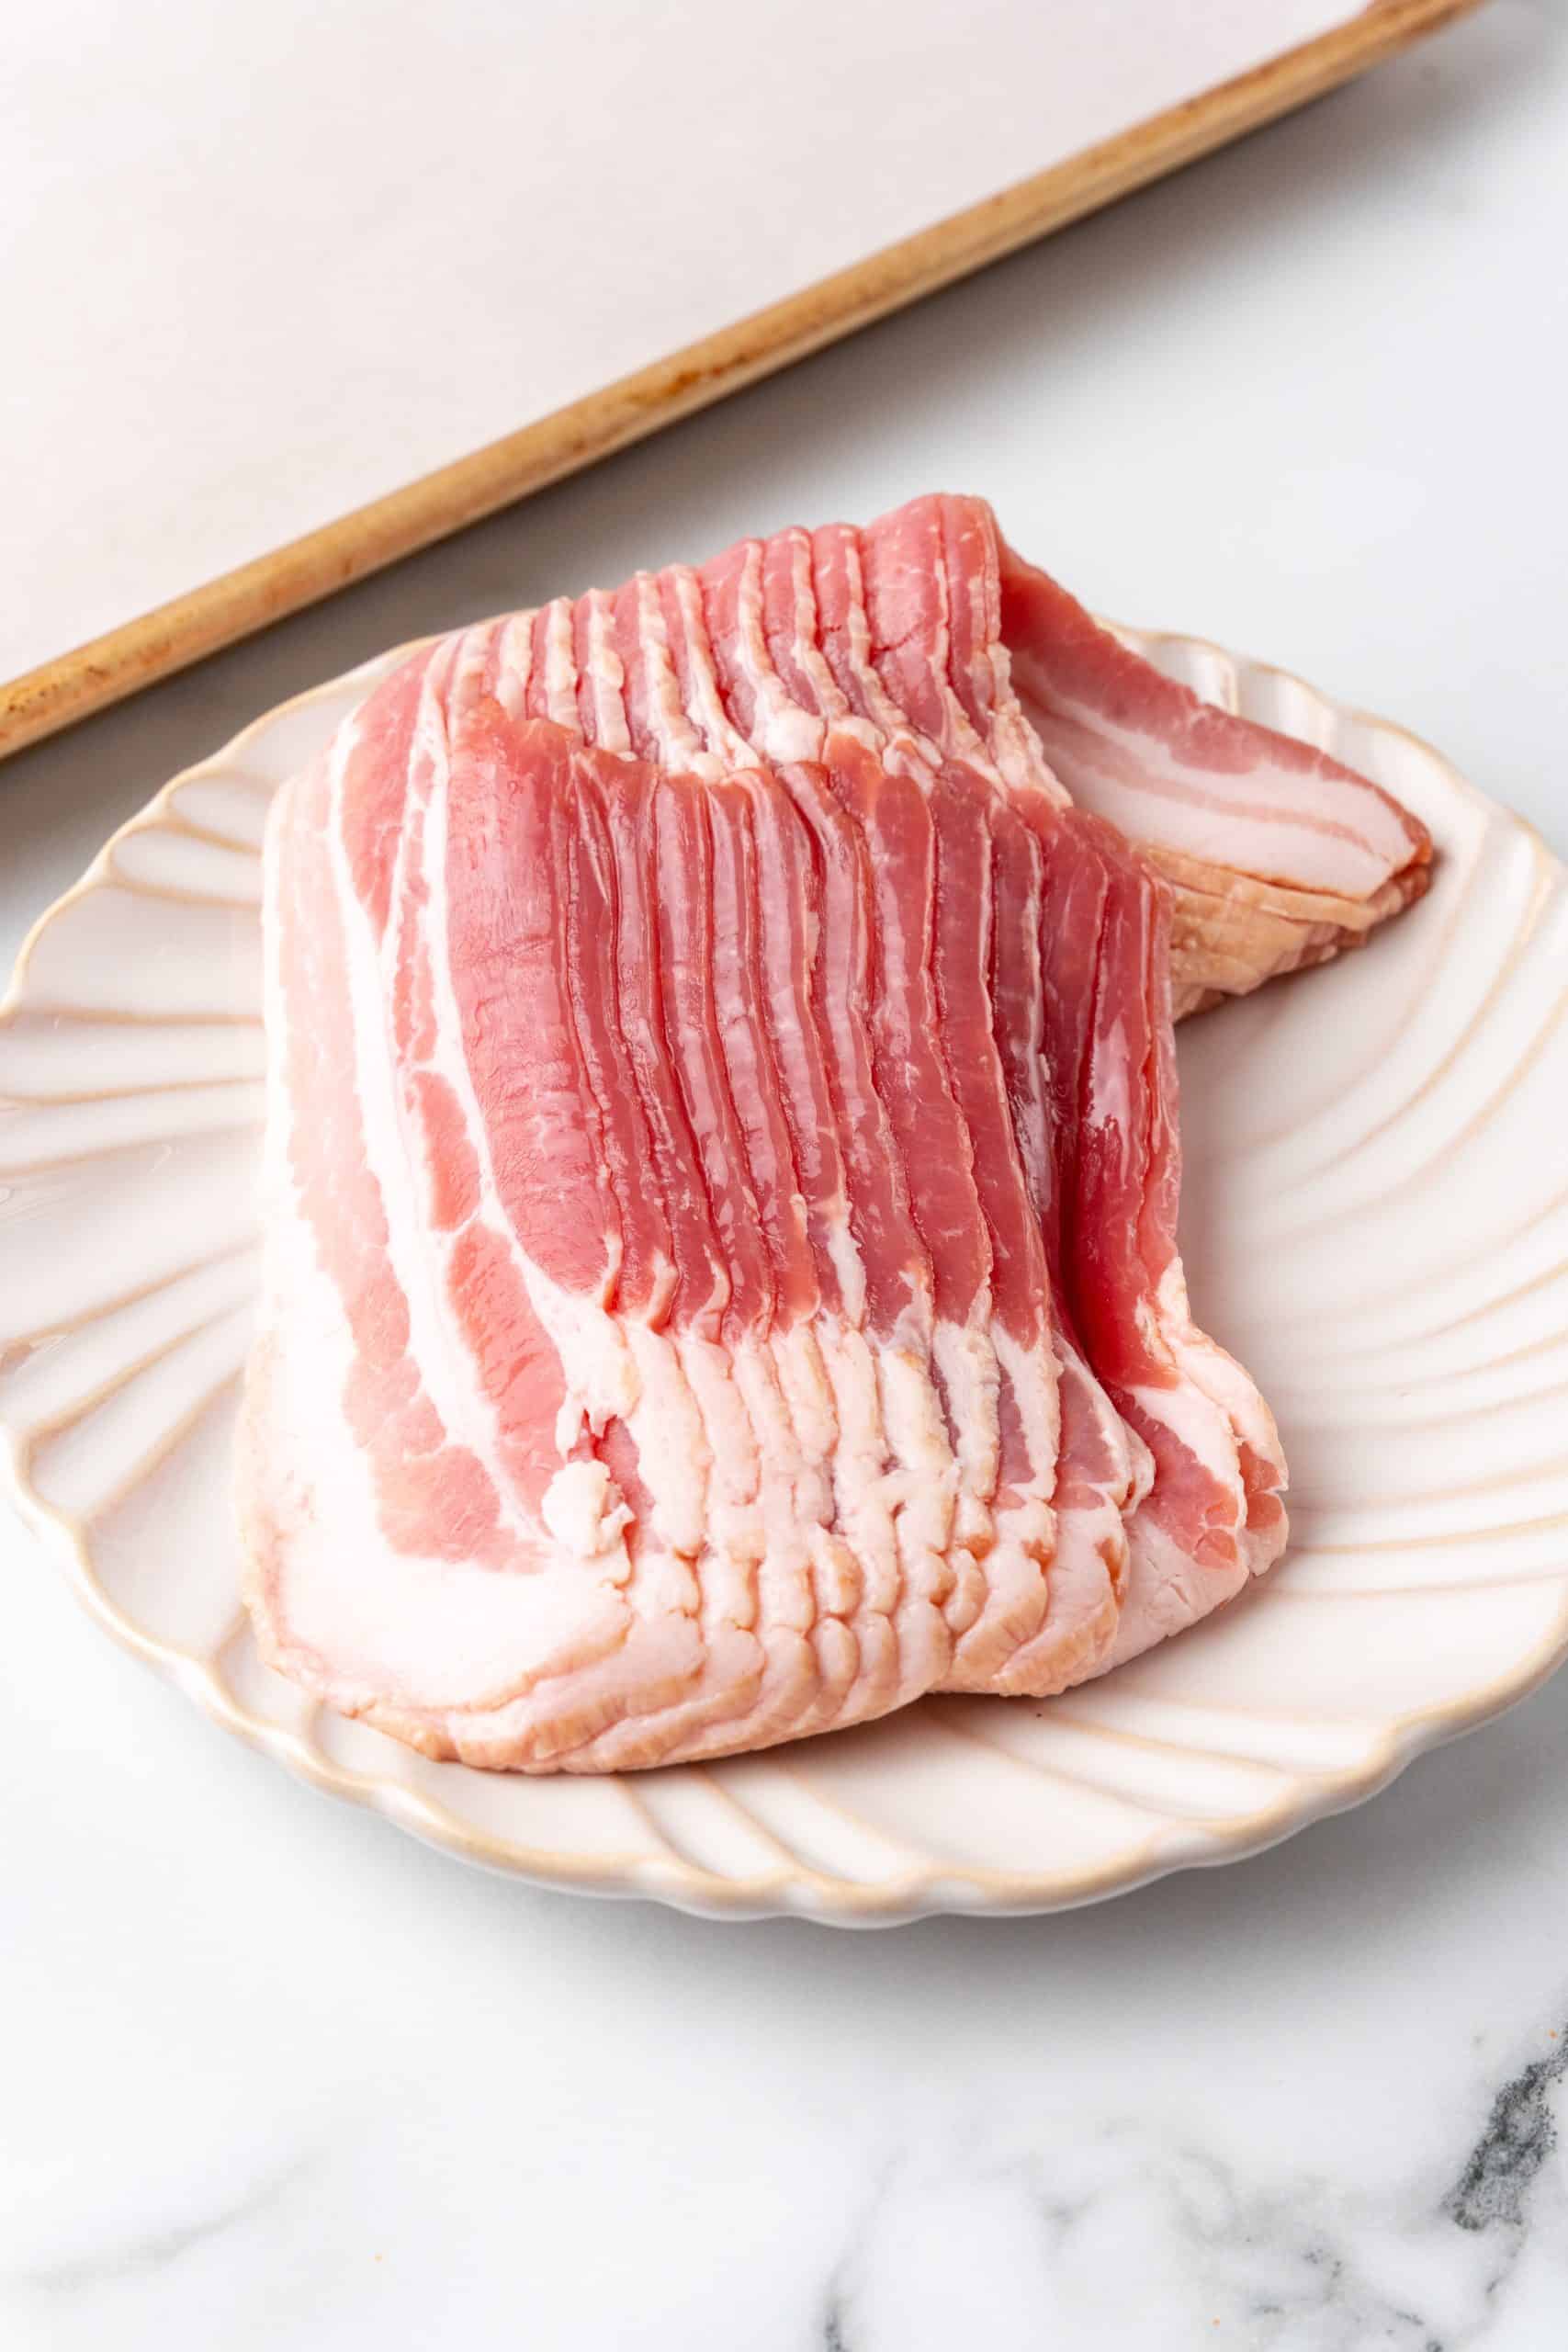 slices of uncooked bacon in a white plate